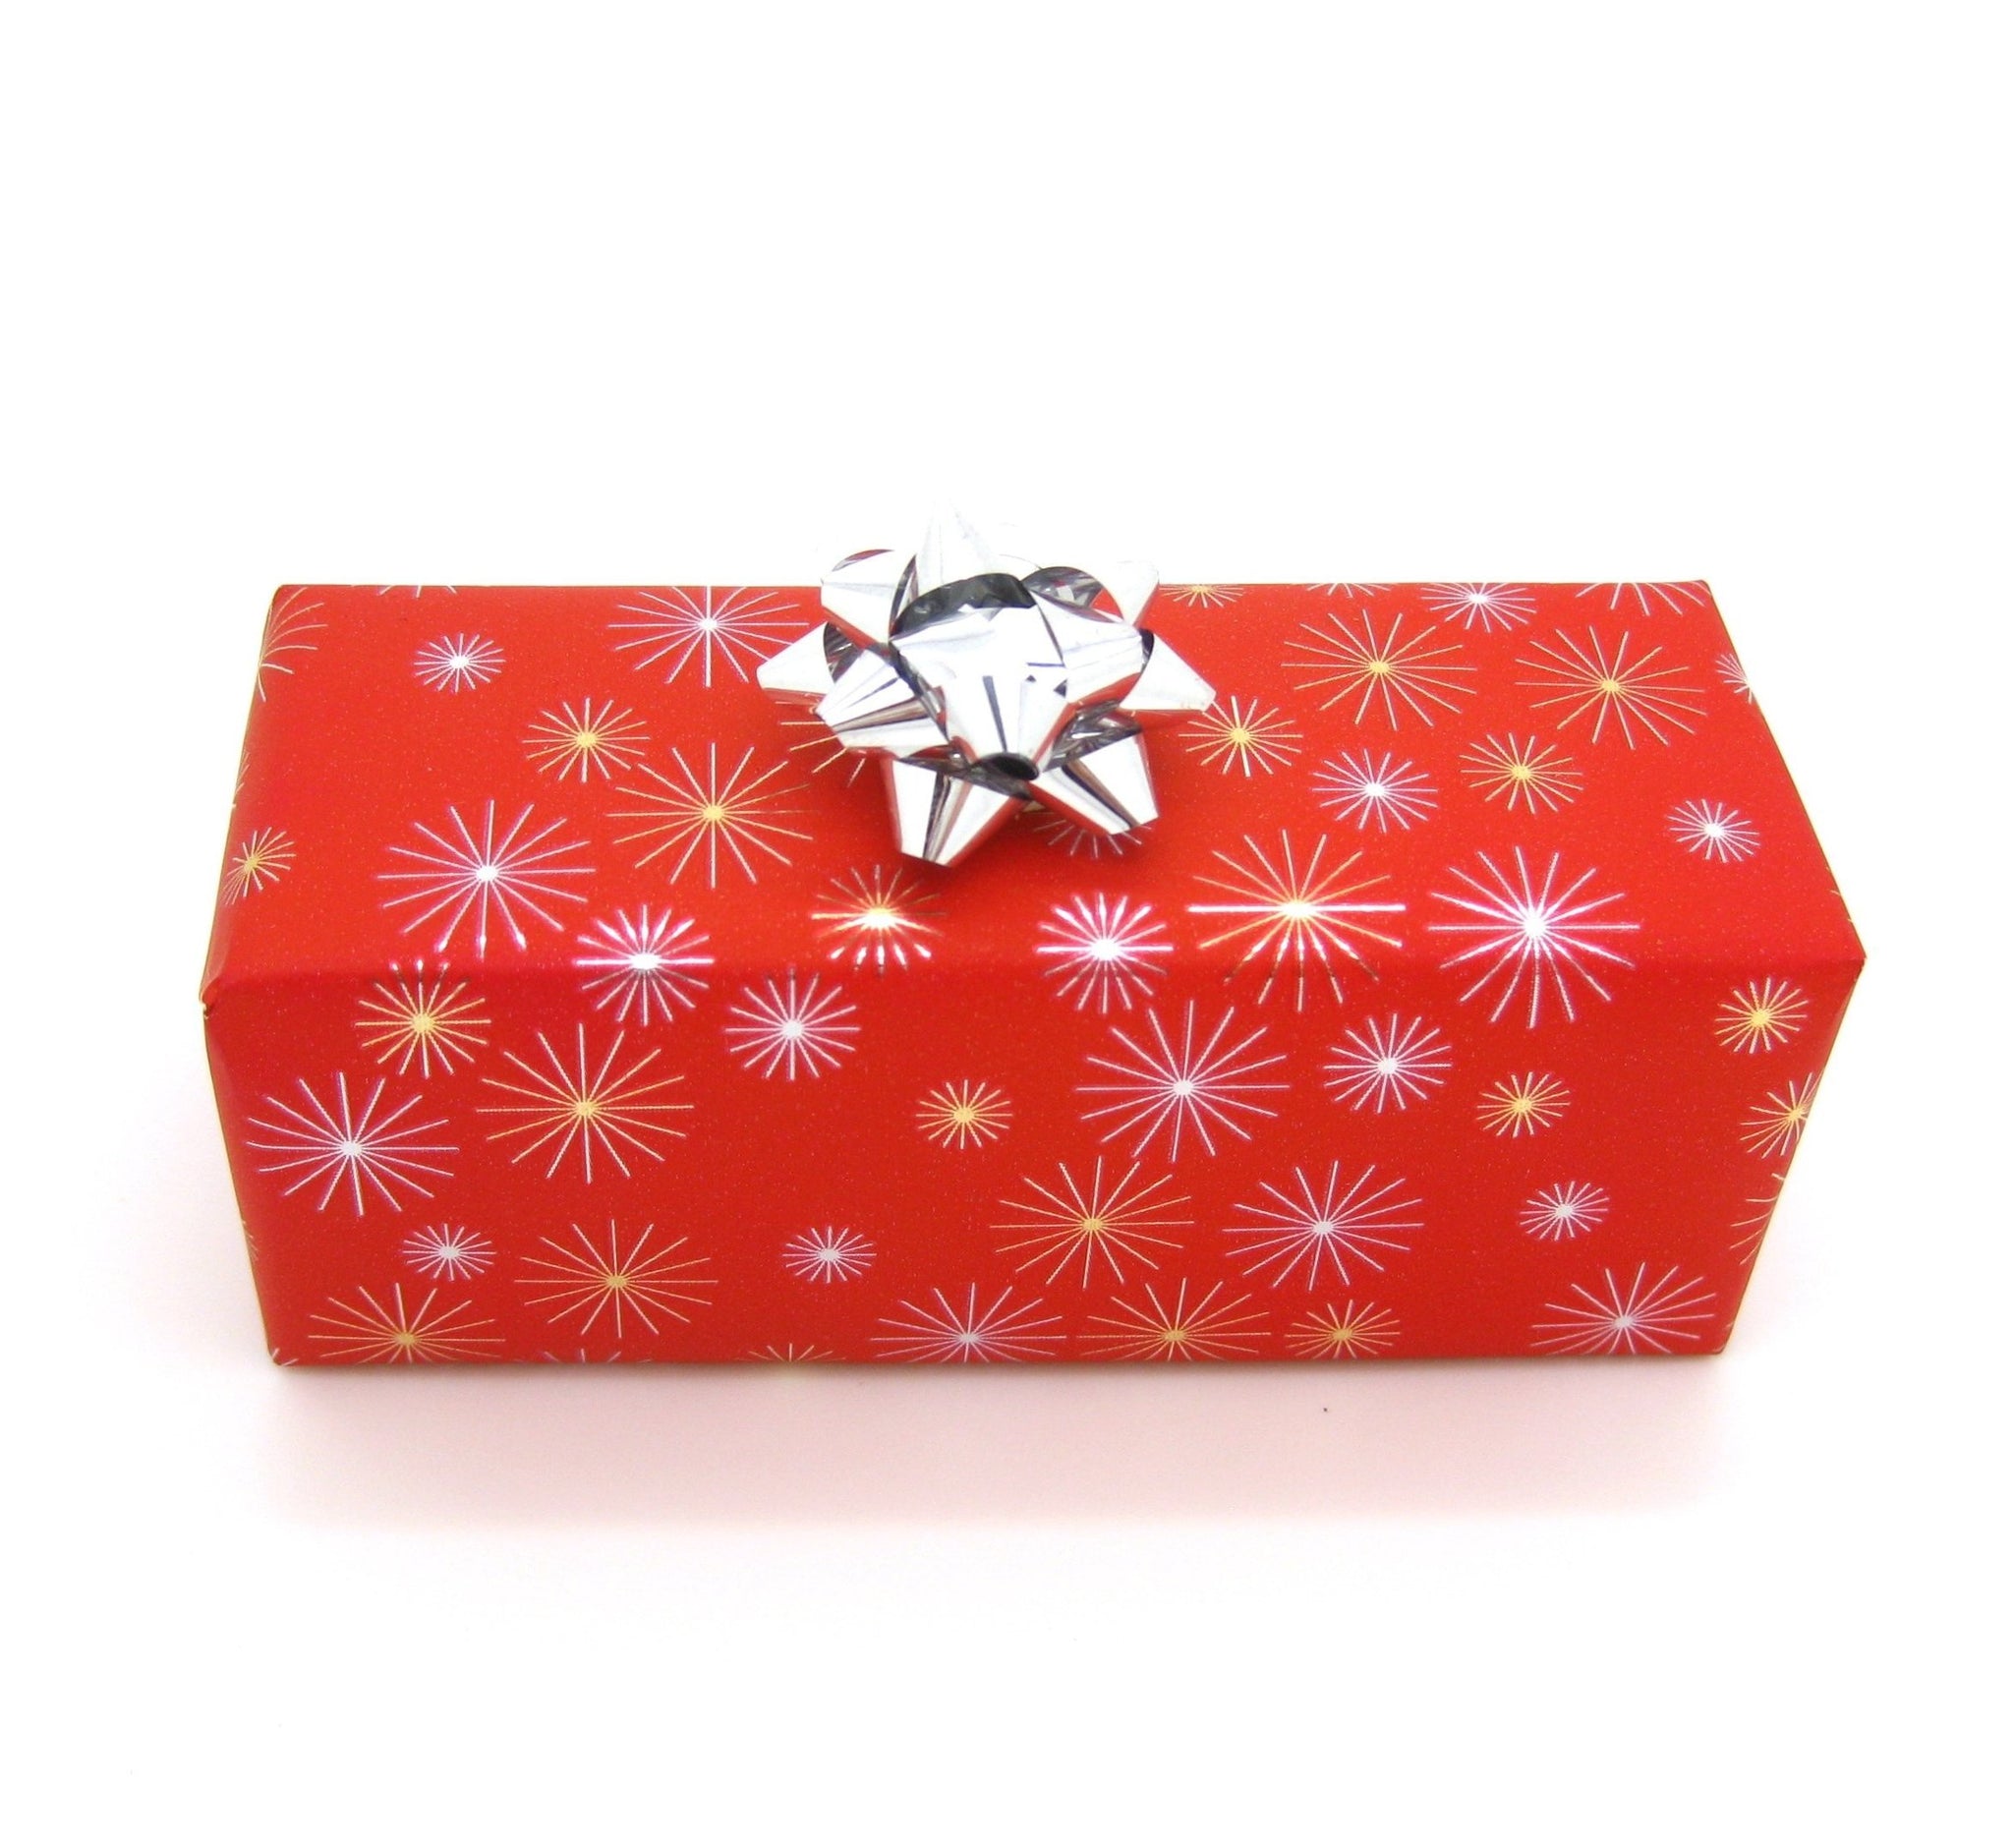 Red Star Design Xmas Wrapping Paper-Trade Xmas Gift Wrap